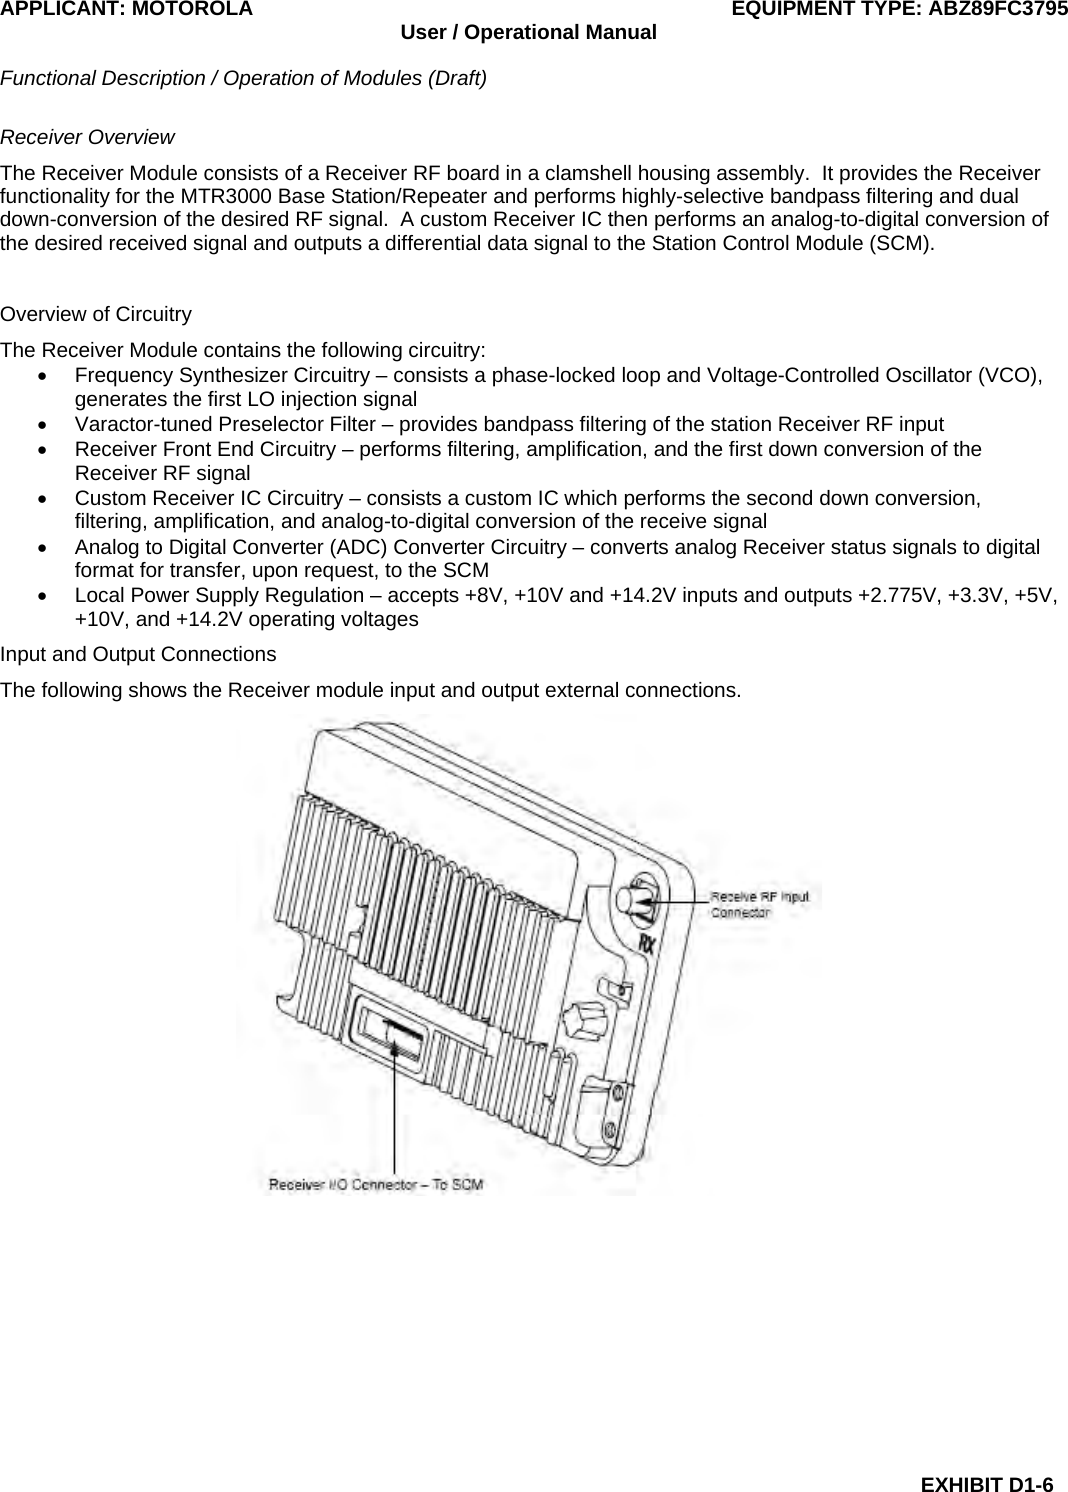 APPLICANT: MOTOROLA  EQUIPMENT TYPE: ABZ89FC3795 User / Operational Manual  Functional Description / Operation of Modules (Draft)  EXHIBIT D1-6 Receiver Overview The Receiver Module consists of a Receiver RF board in a clamshell housing assembly.  It provides the Receiver functionality for the MTR3000 Base Station/Repeater and performs highly-selective bandpass filtering and dual down-conversion of the desired RF signal.  A custom Receiver IC then performs an analog-to-digital conversion of the desired received signal and outputs a differential data signal to the Station Control Module (SCM).  Overview of Circuitry The Receiver Module contains the following circuitry: •  Frequency Synthesizer Circuitry – consists a phase-locked loop and Voltage-Controlled Oscillator (VCO), generates the first LO injection signal •  Varactor-tuned Preselector Filter – provides bandpass filtering of the station Receiver RF input •  Receiver Front End Circuitry – performs filtering, amplification, and the first down conversion of the Receiver RF signal •  Custom Receiver IC Circuitry – consists a custom IC which performs the second down conversion, filtering, amplification, and analog-to-digital conversion of the receive signal •  Analog to Digital Converter (ADC) Converter Circuitry – converts analog Receiver status signals to digital format for transfer, upon request, to the SCM •  Local Power Supply Regulation – accepts +8V, +10V and +14.2V inputs and outputs +2.775V, +3.3V, +5V, +10V, and +14.2V operating voltages Input and Output Connections The following shows the Receiver module input and output external connections.  